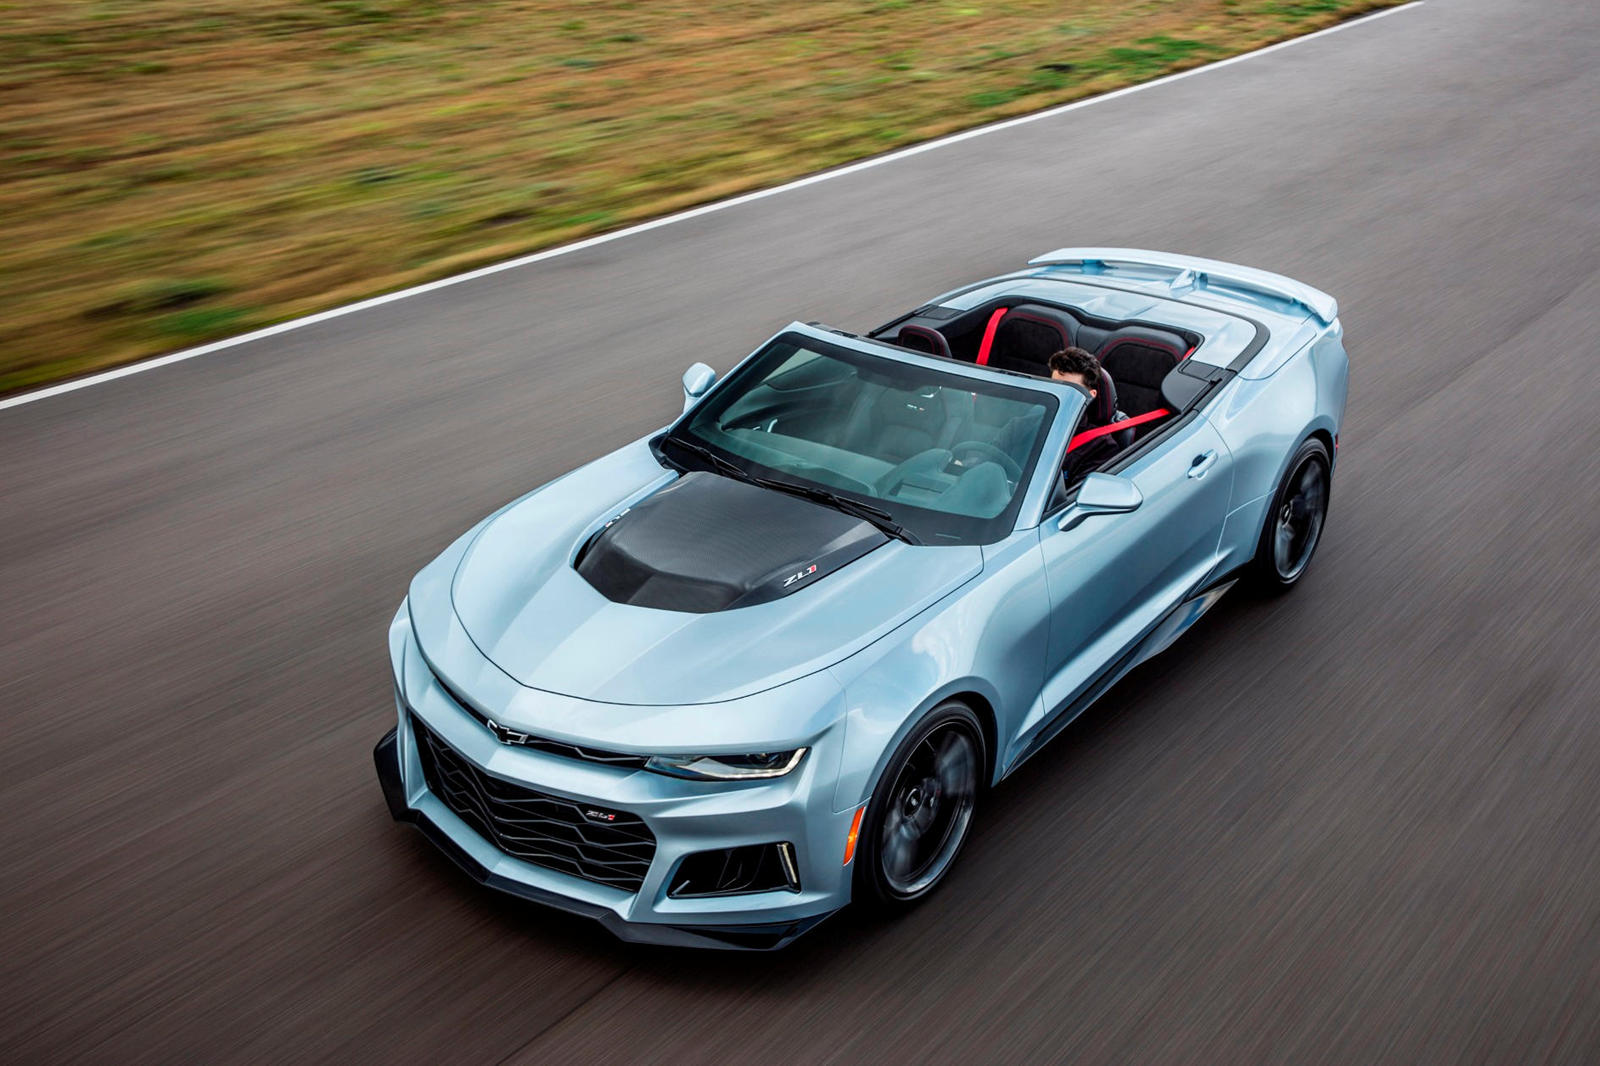 Chevrolet Camaro Zl1 Convertible Review Trims Specs Price New Interior Features Exterior Design And Specifications Carbuzz